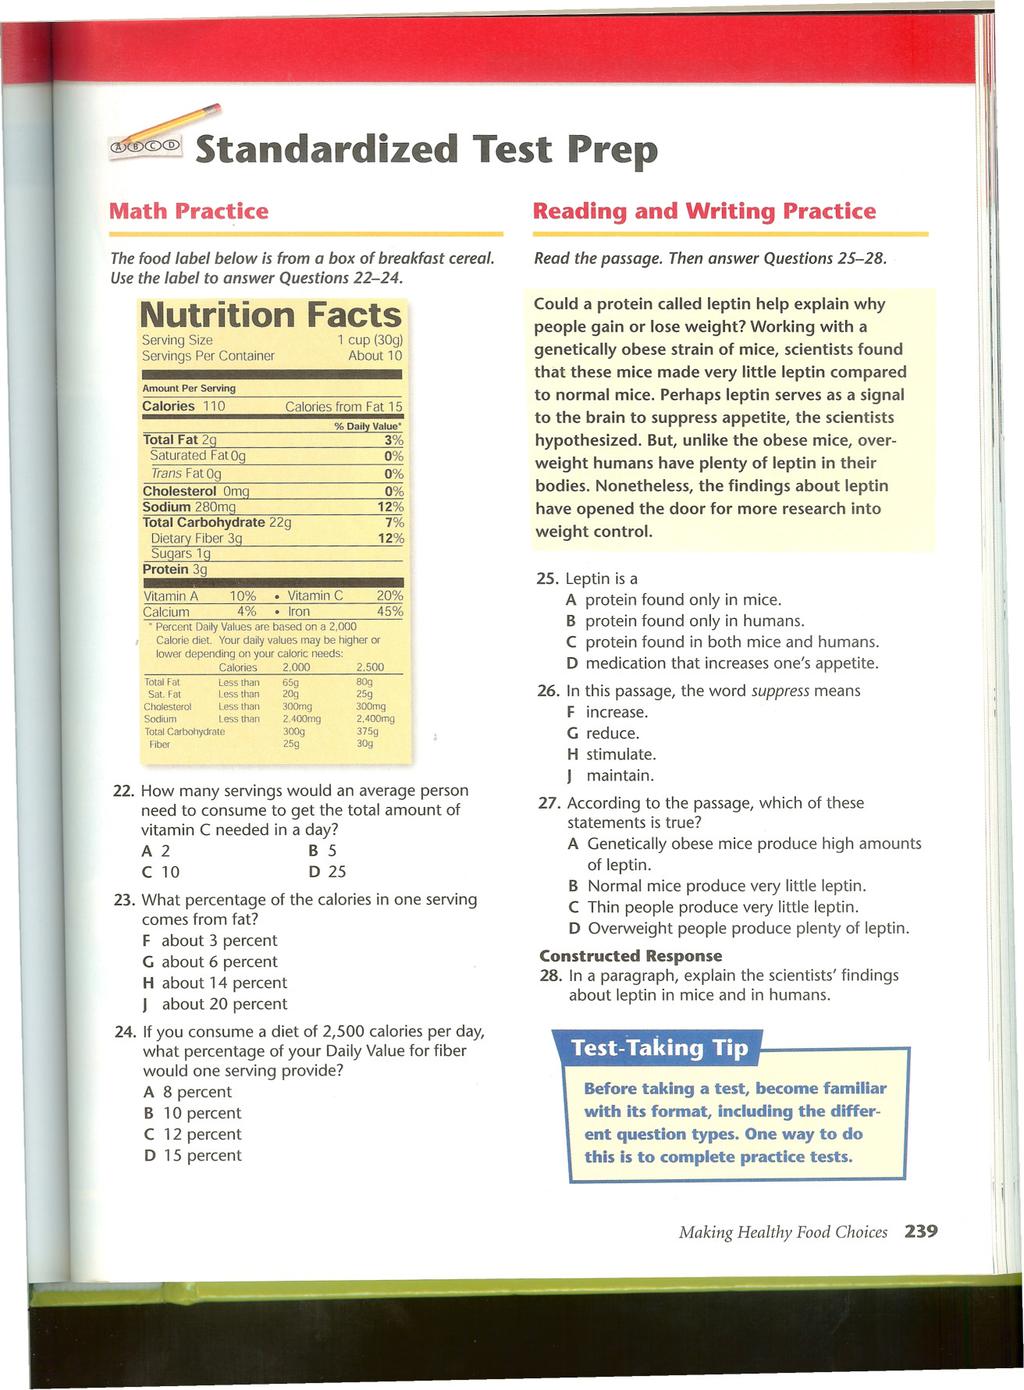 ~tandardized Math Practice Test Prep Reading and Writing Practice The food label below is from a box of breakfast cereal. Usethe label to answer Questions 22-24.